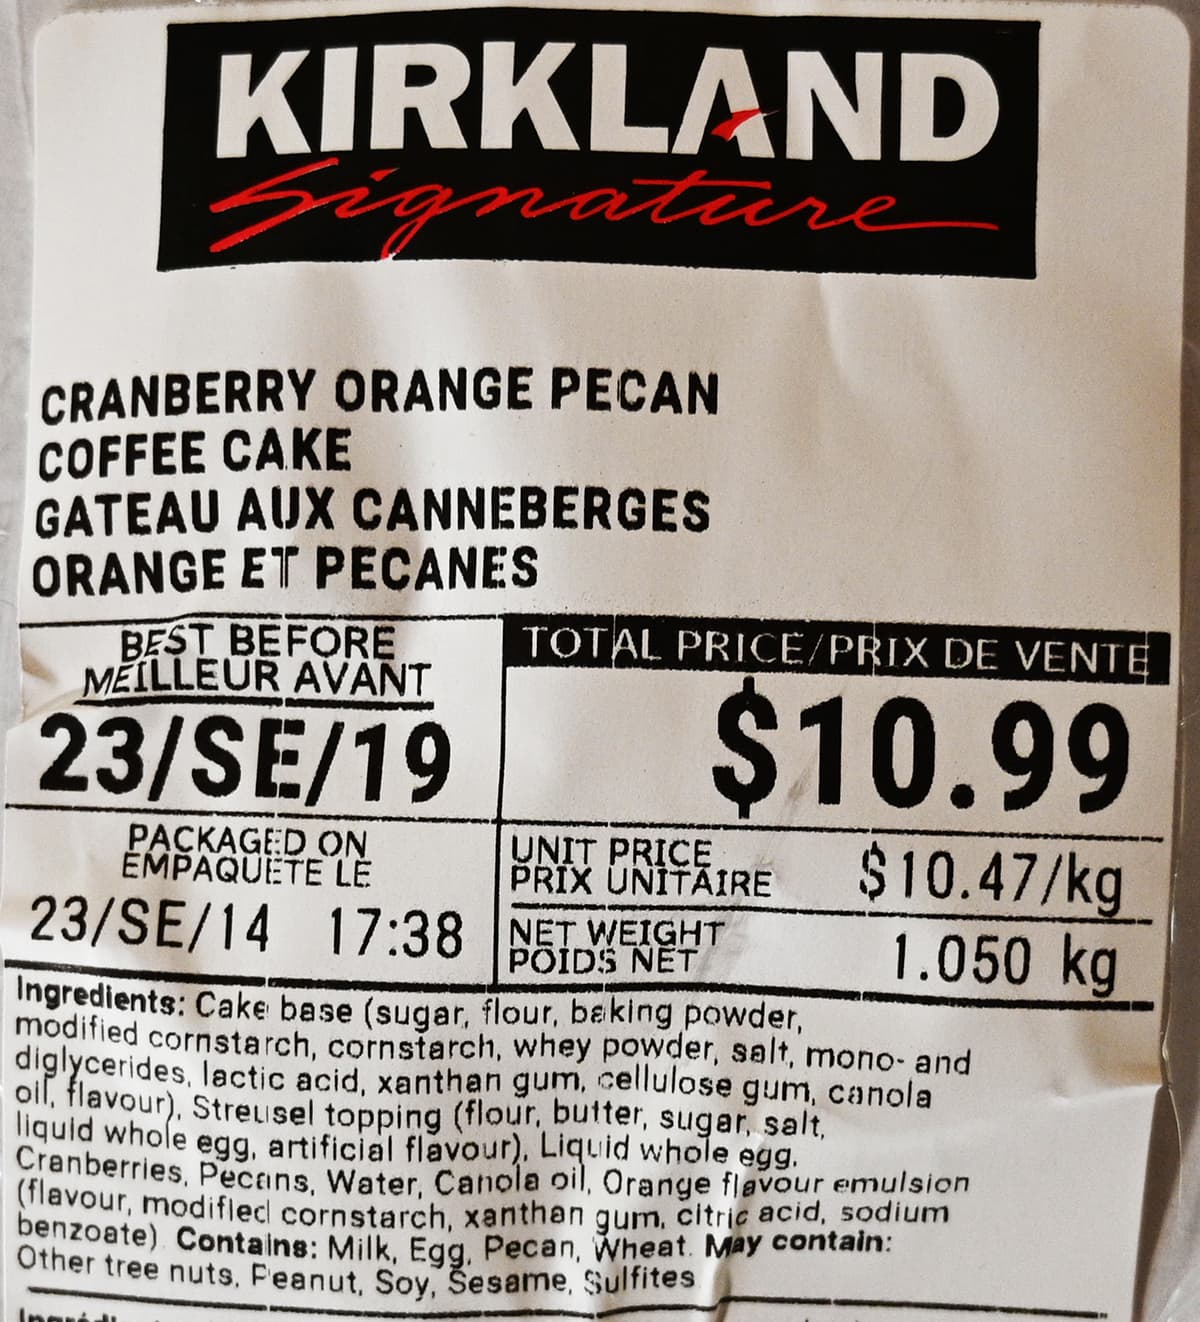 Closeup image of the front label of the coffee cake showing price, best before date and ingredients.